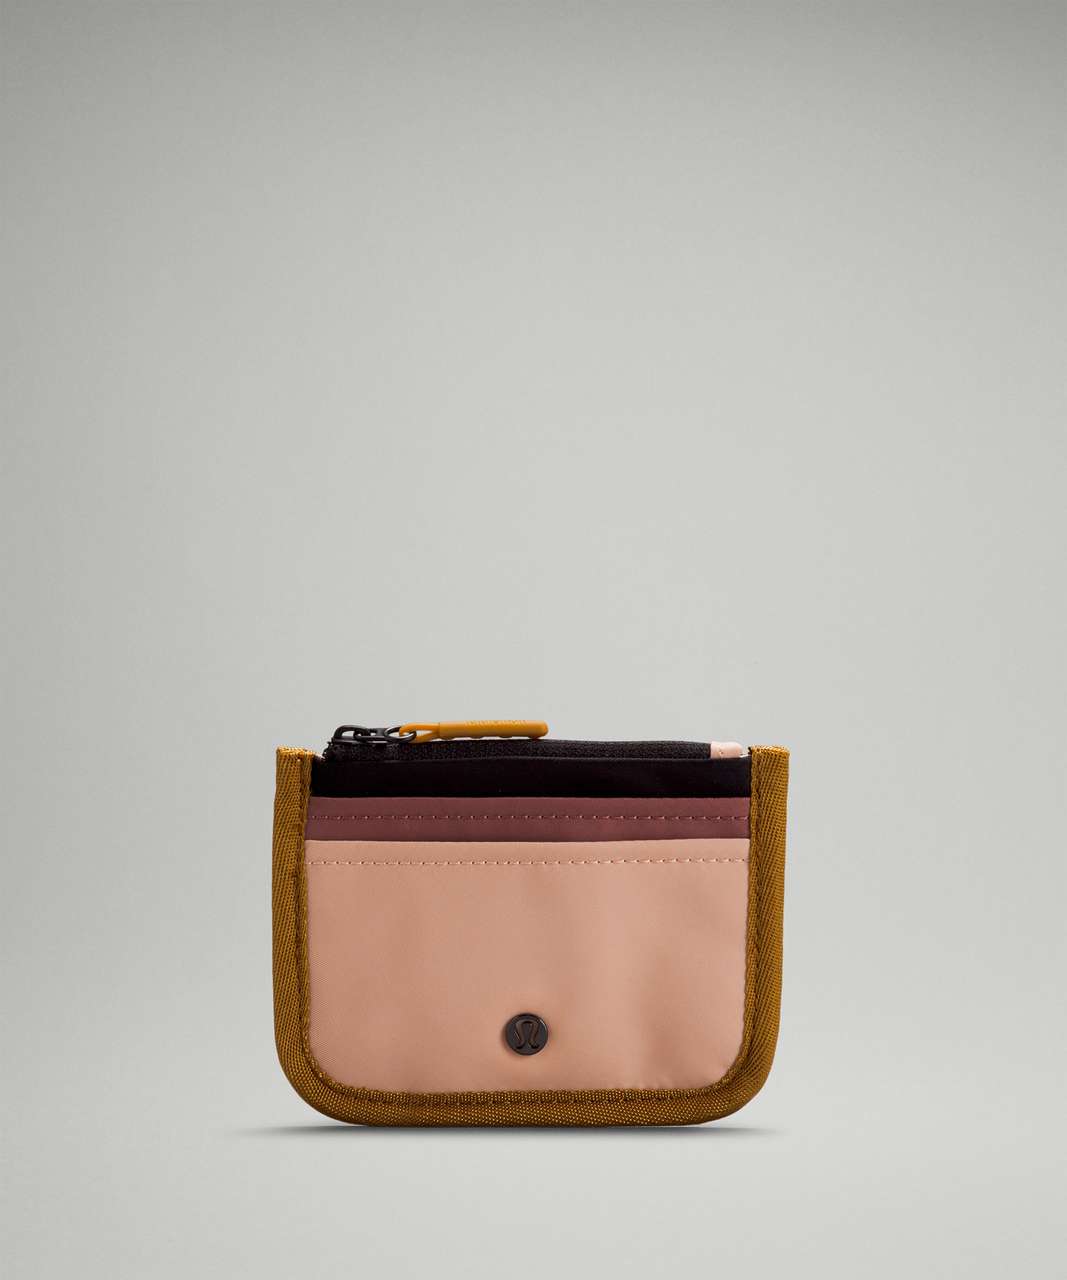 Lululemon True Identity Card Case - Spiced Chai / Precocious Pink / Gold Spice